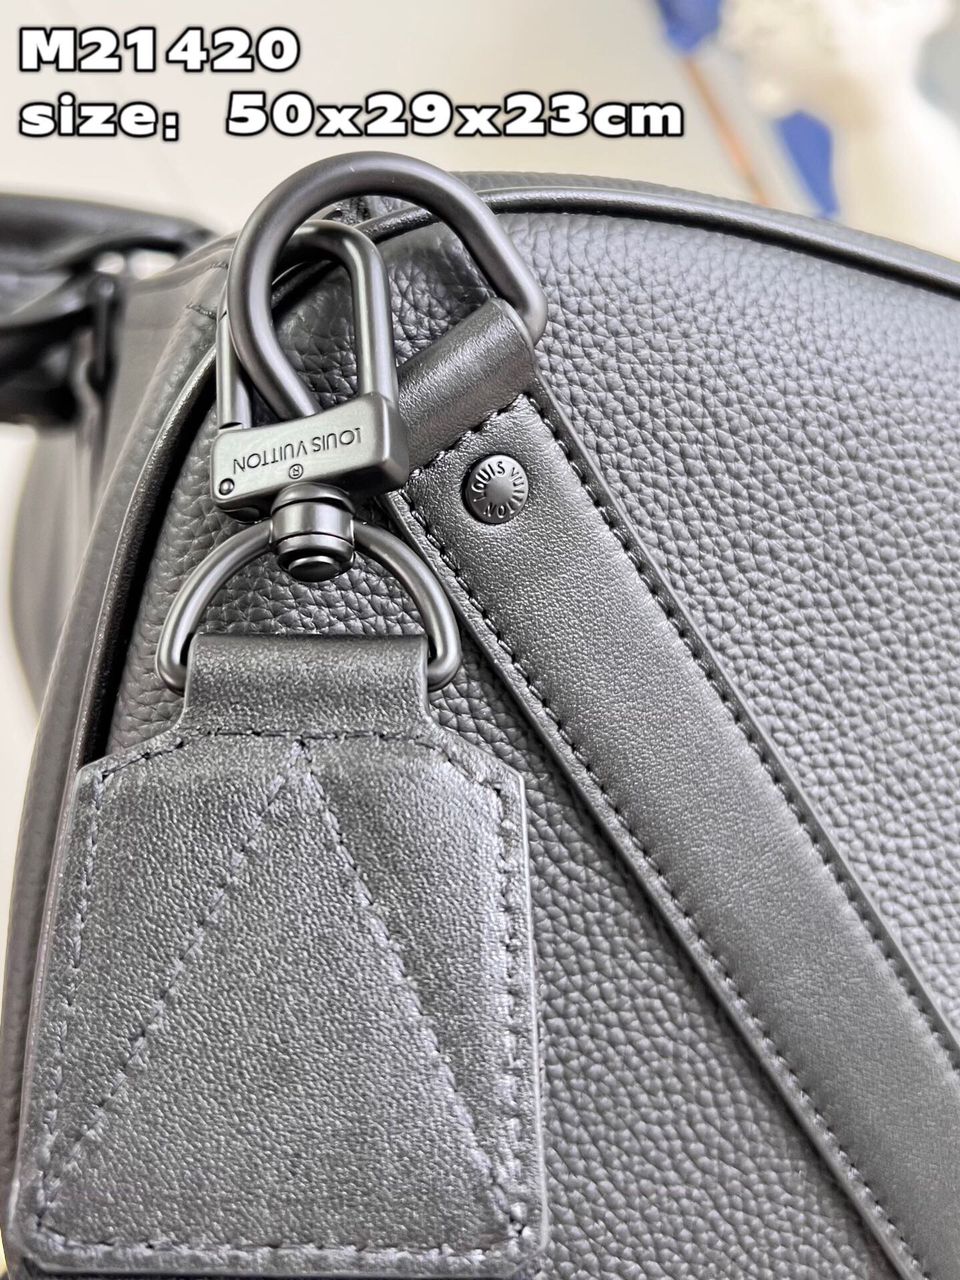 The inside is re-designed with red textile lining and legacy details ins…  Louis  vuitton handbags outlet, Cheap louis vuitton handbags, Louis vuitton bag  neverfull